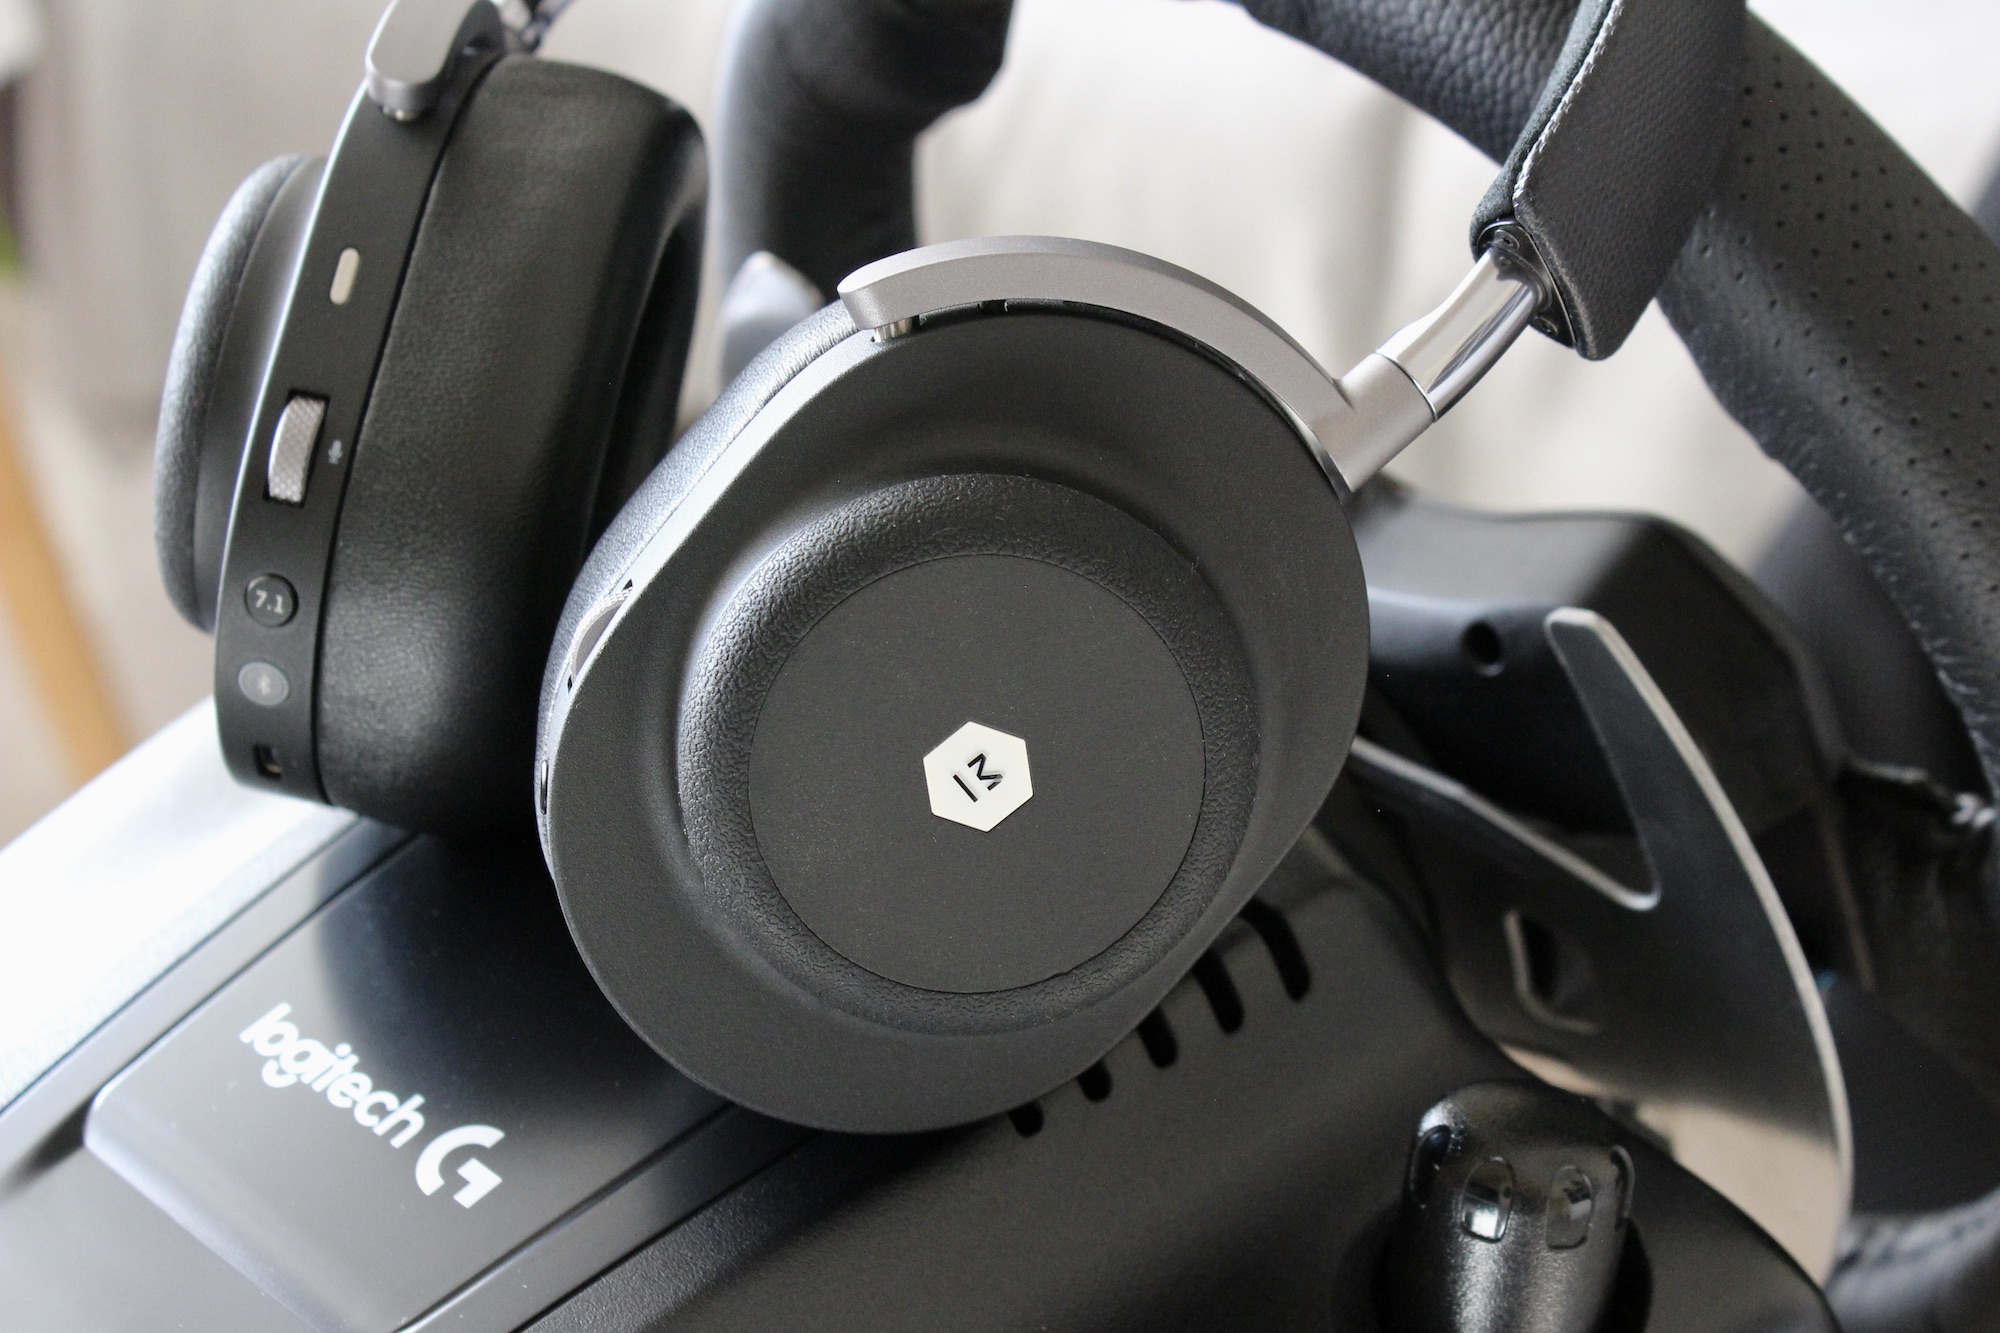 Master & Dynamic MG20 headphone cup and logo.